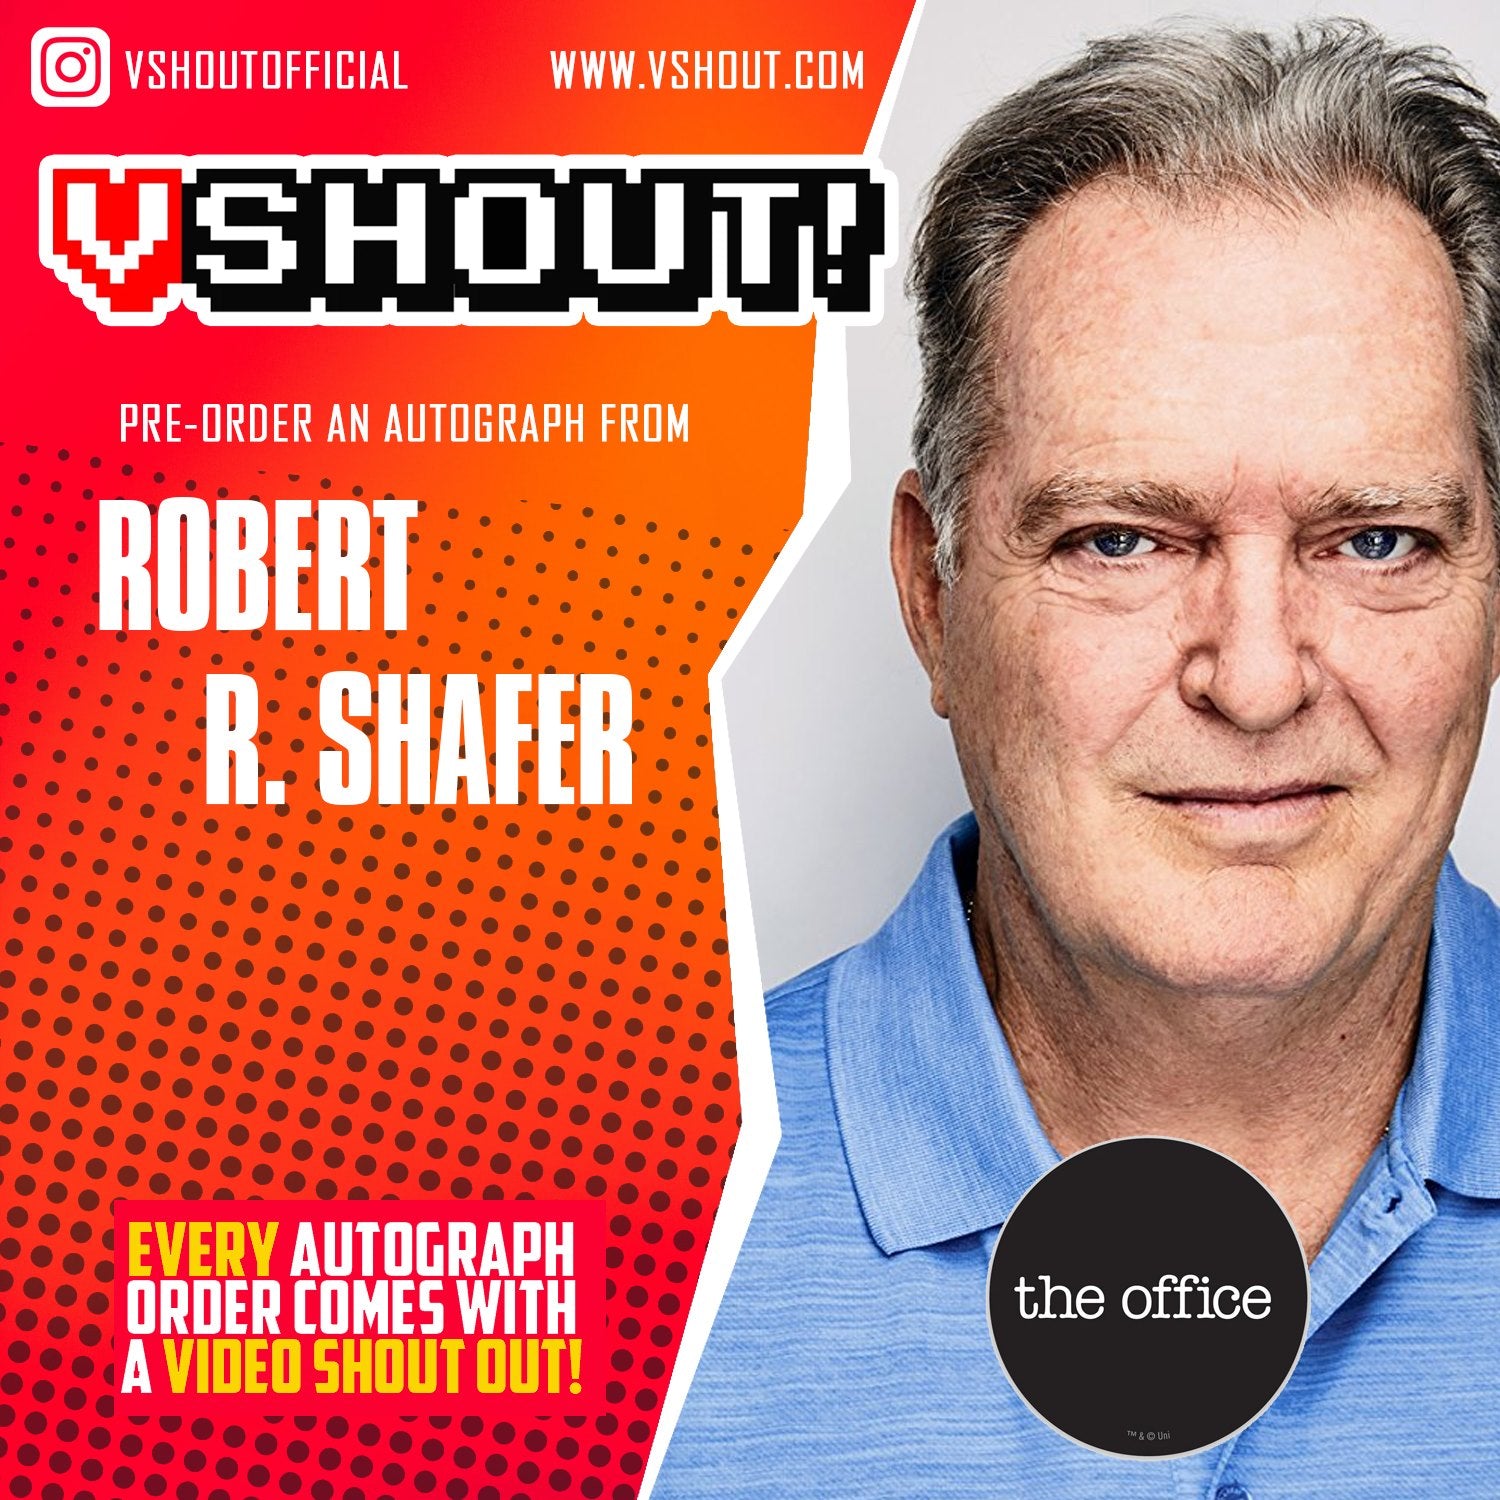 Closed Robert R. Shafer Official vShout! Autograph Pre-Order